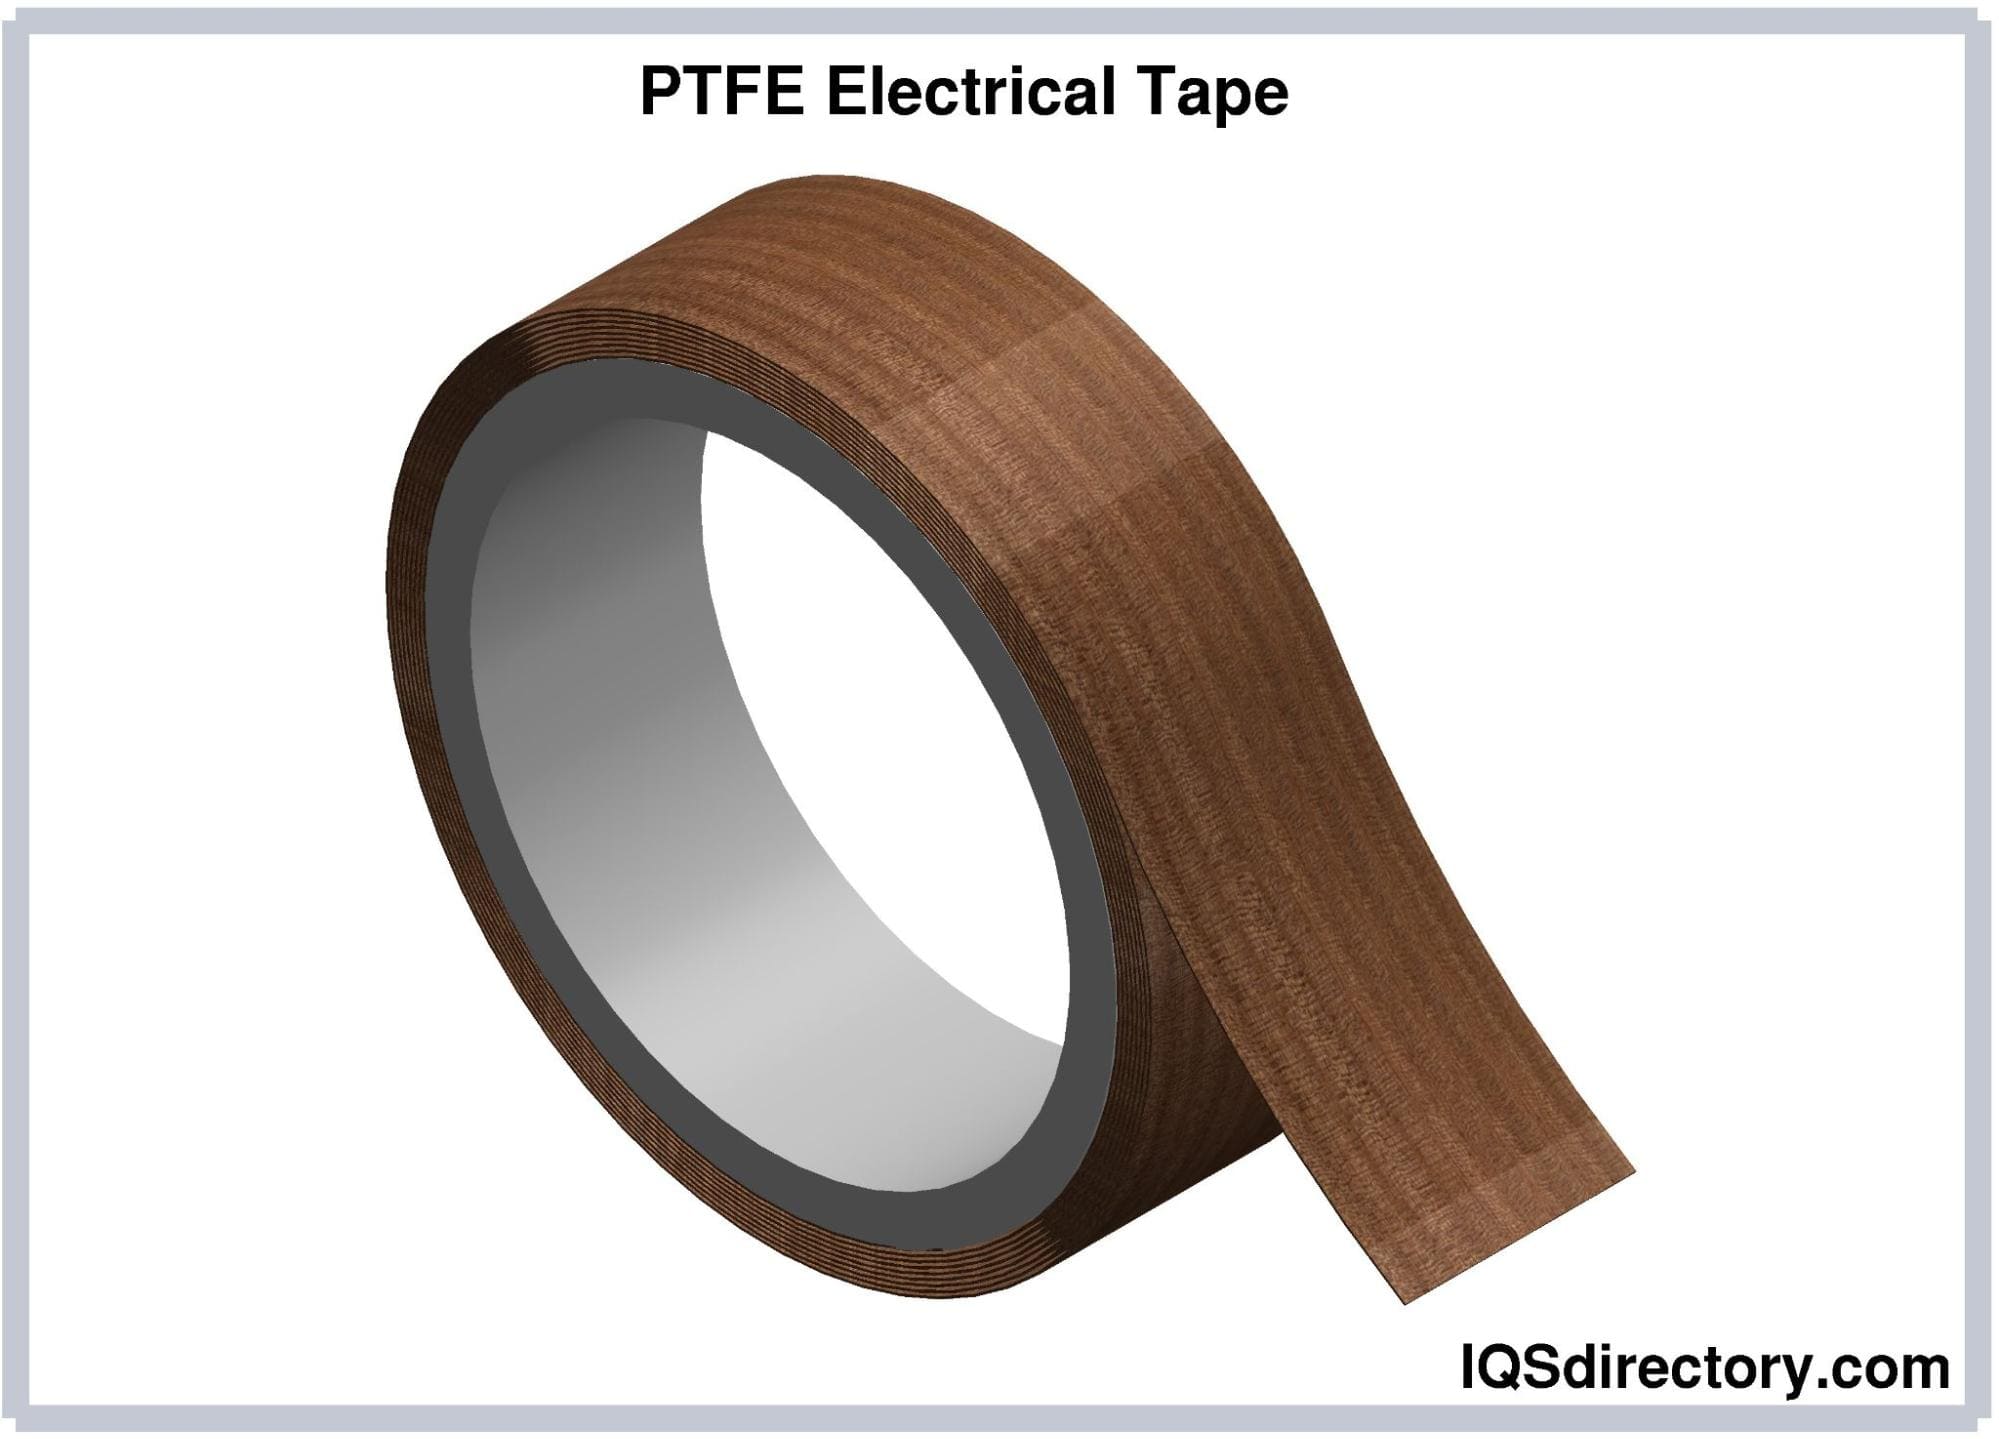 PTFE Electrical Tape